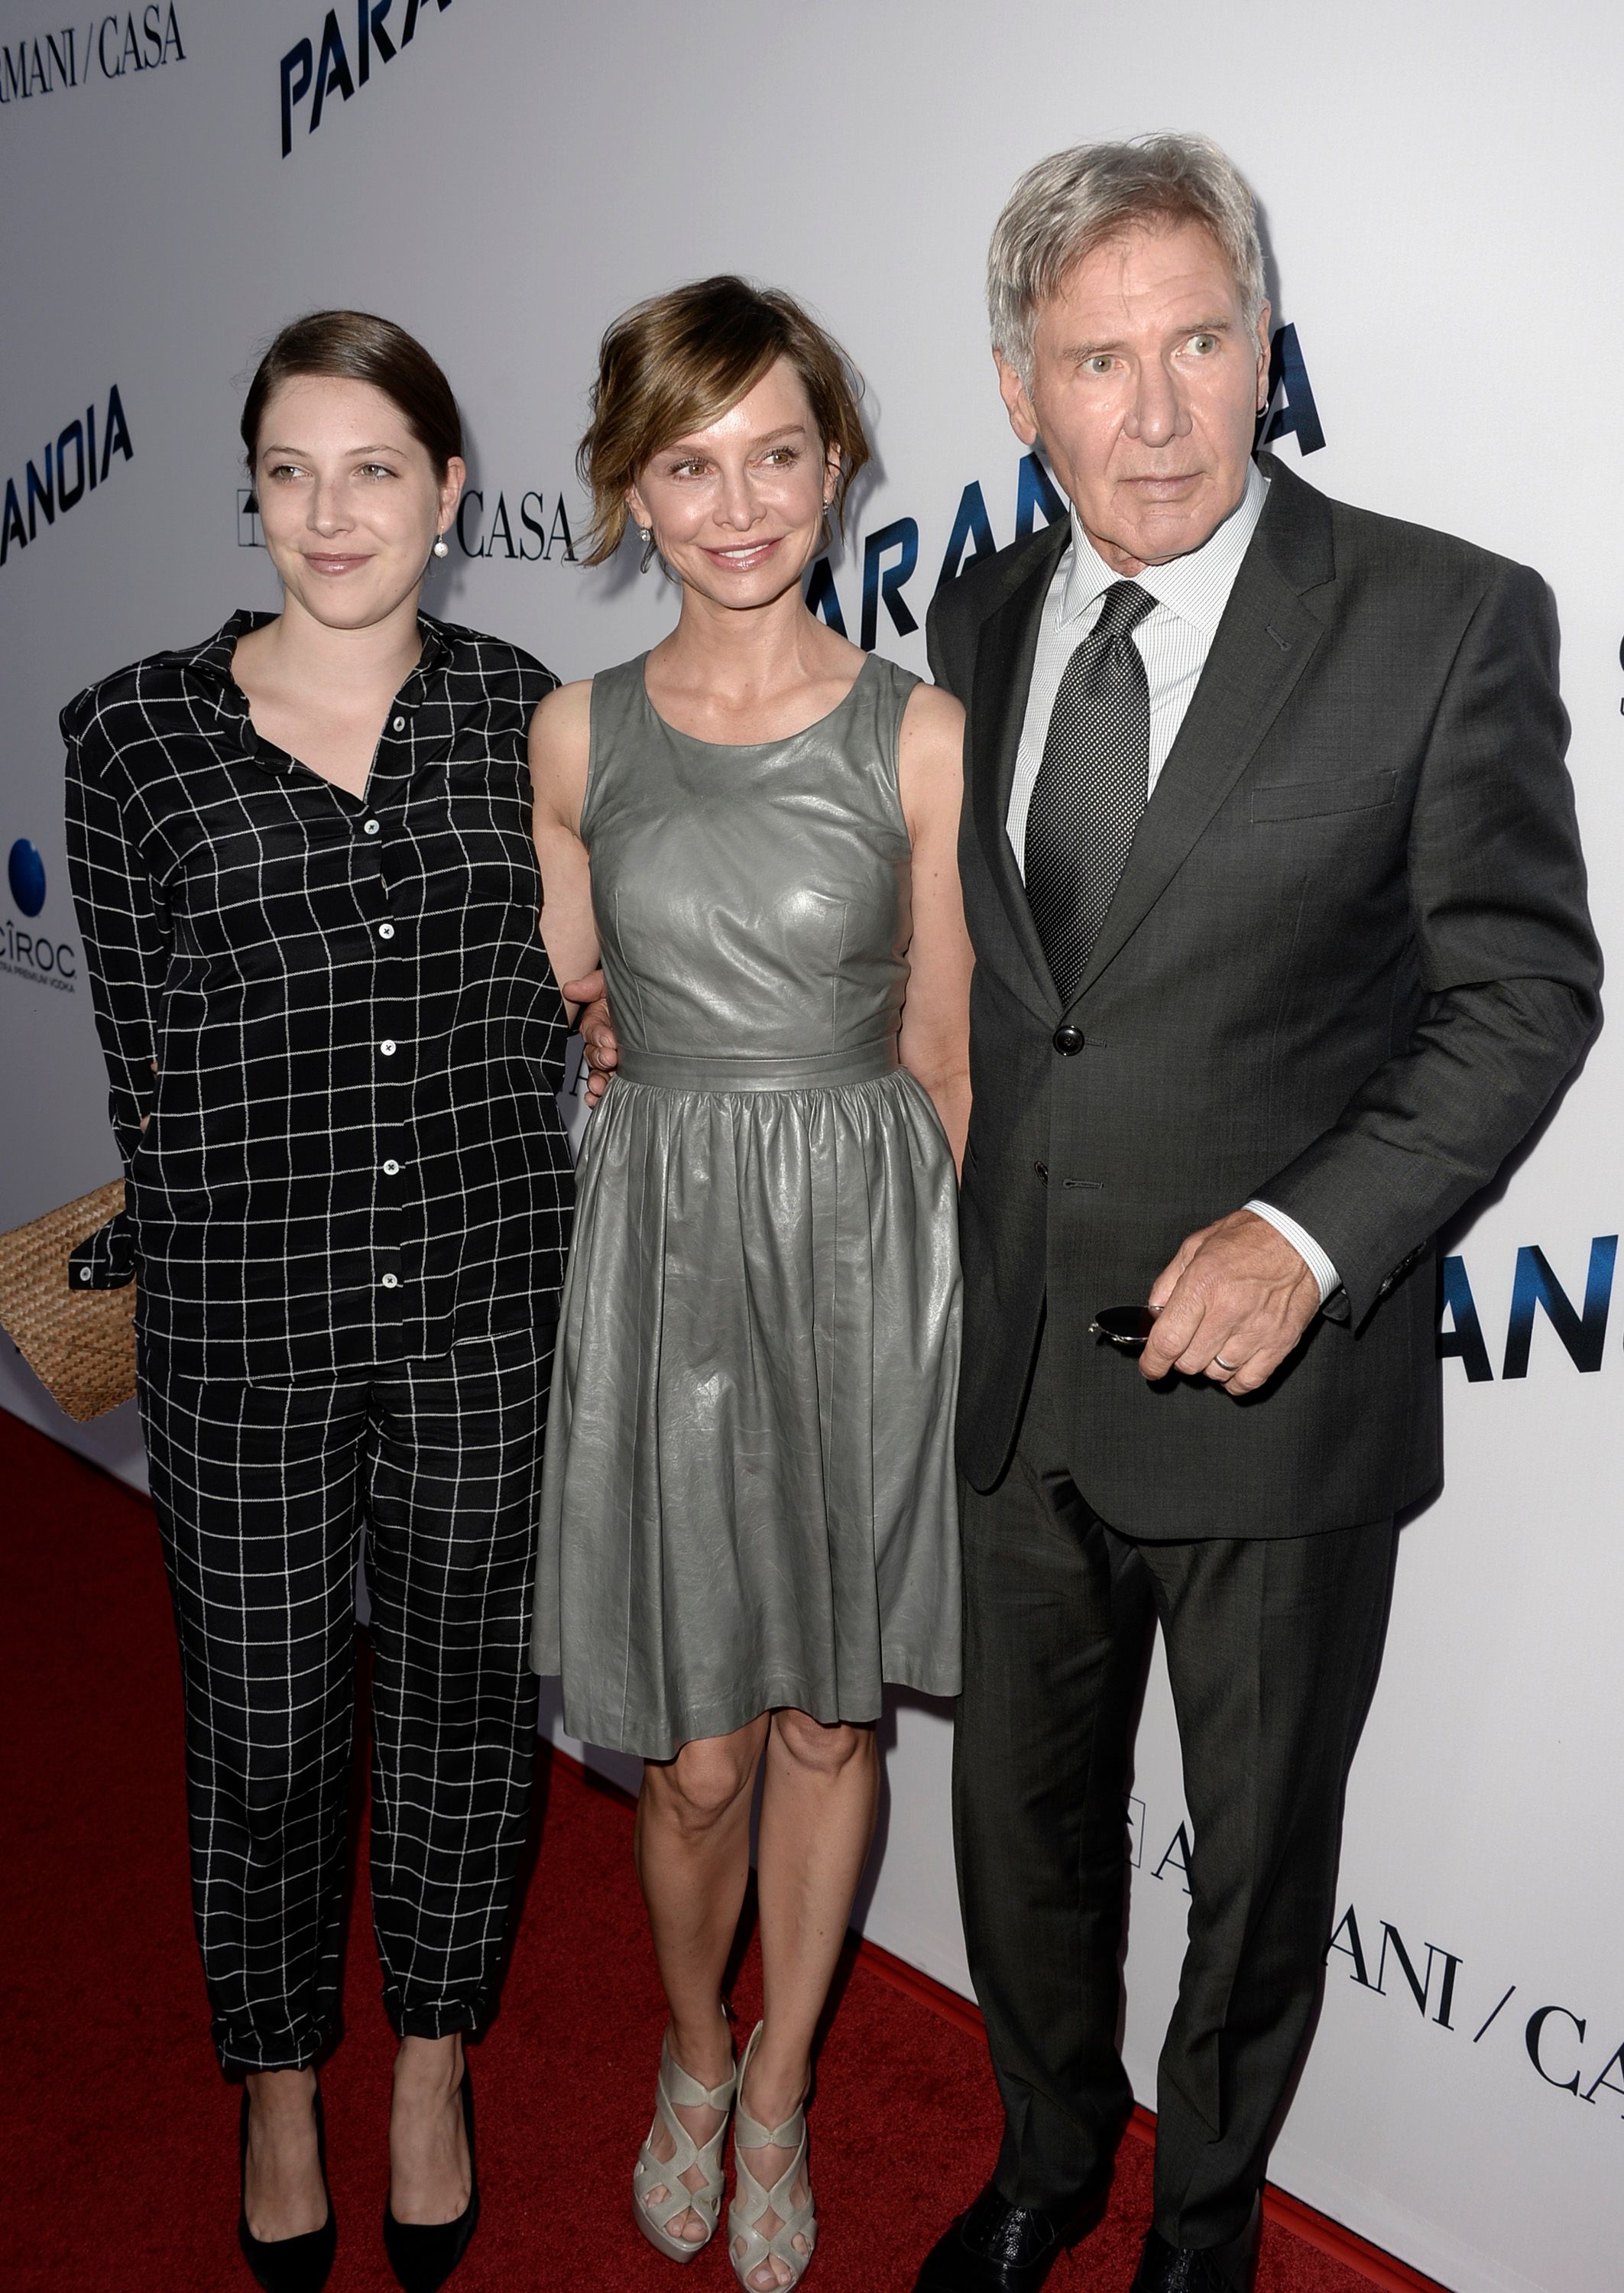 Georgia Ford, Calista Flockhart, and Harrison Ford at the premiere of "Paranoia" on August 8, 2013, in Los Angeles, California. | Source: Kevin Winter/Getty Images